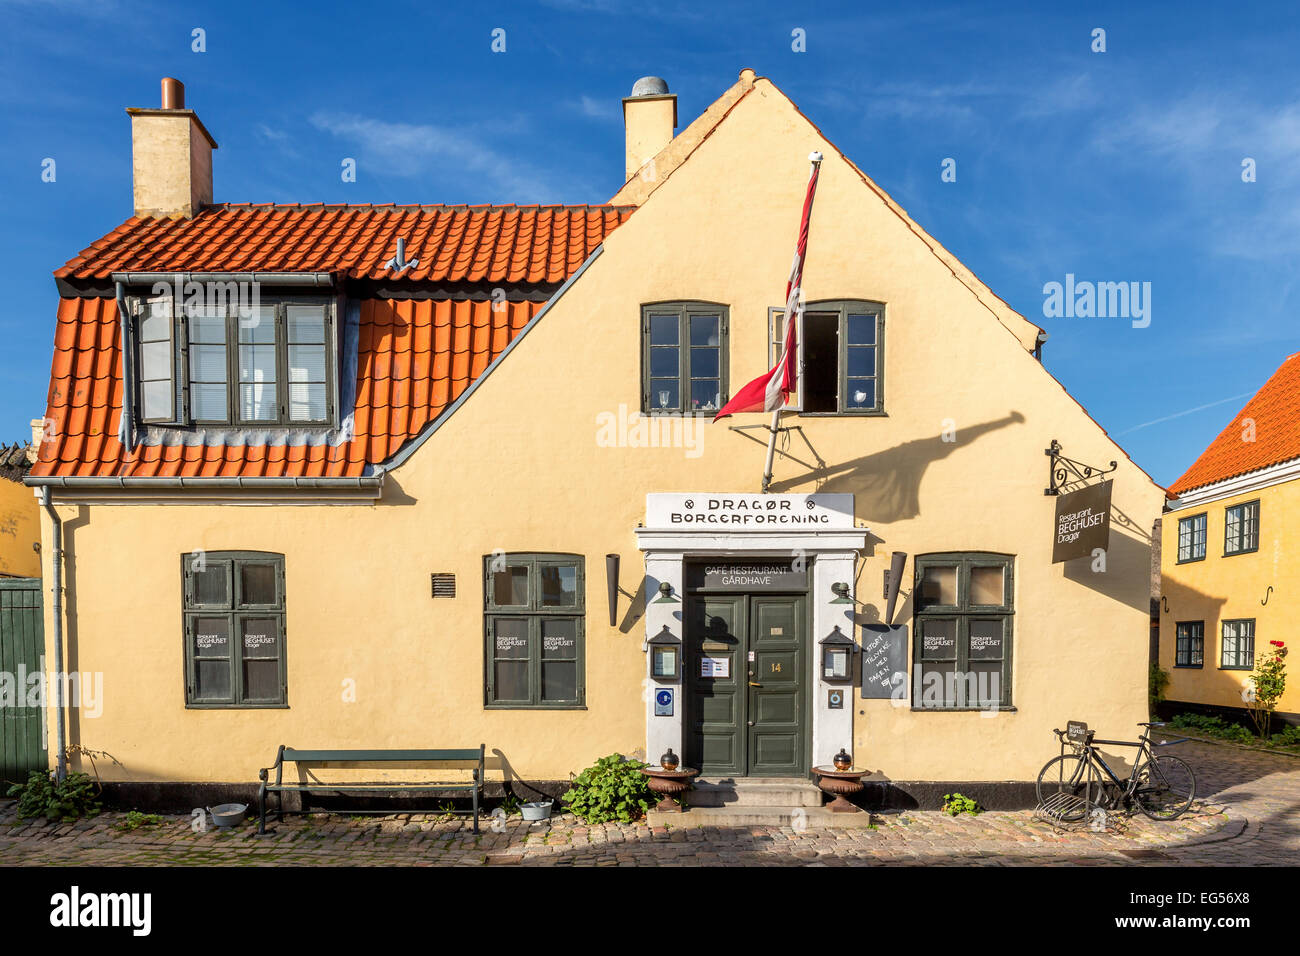 Typical old house in the fishing village of Dragør, Copenhagen area, Denmark Stock Photo